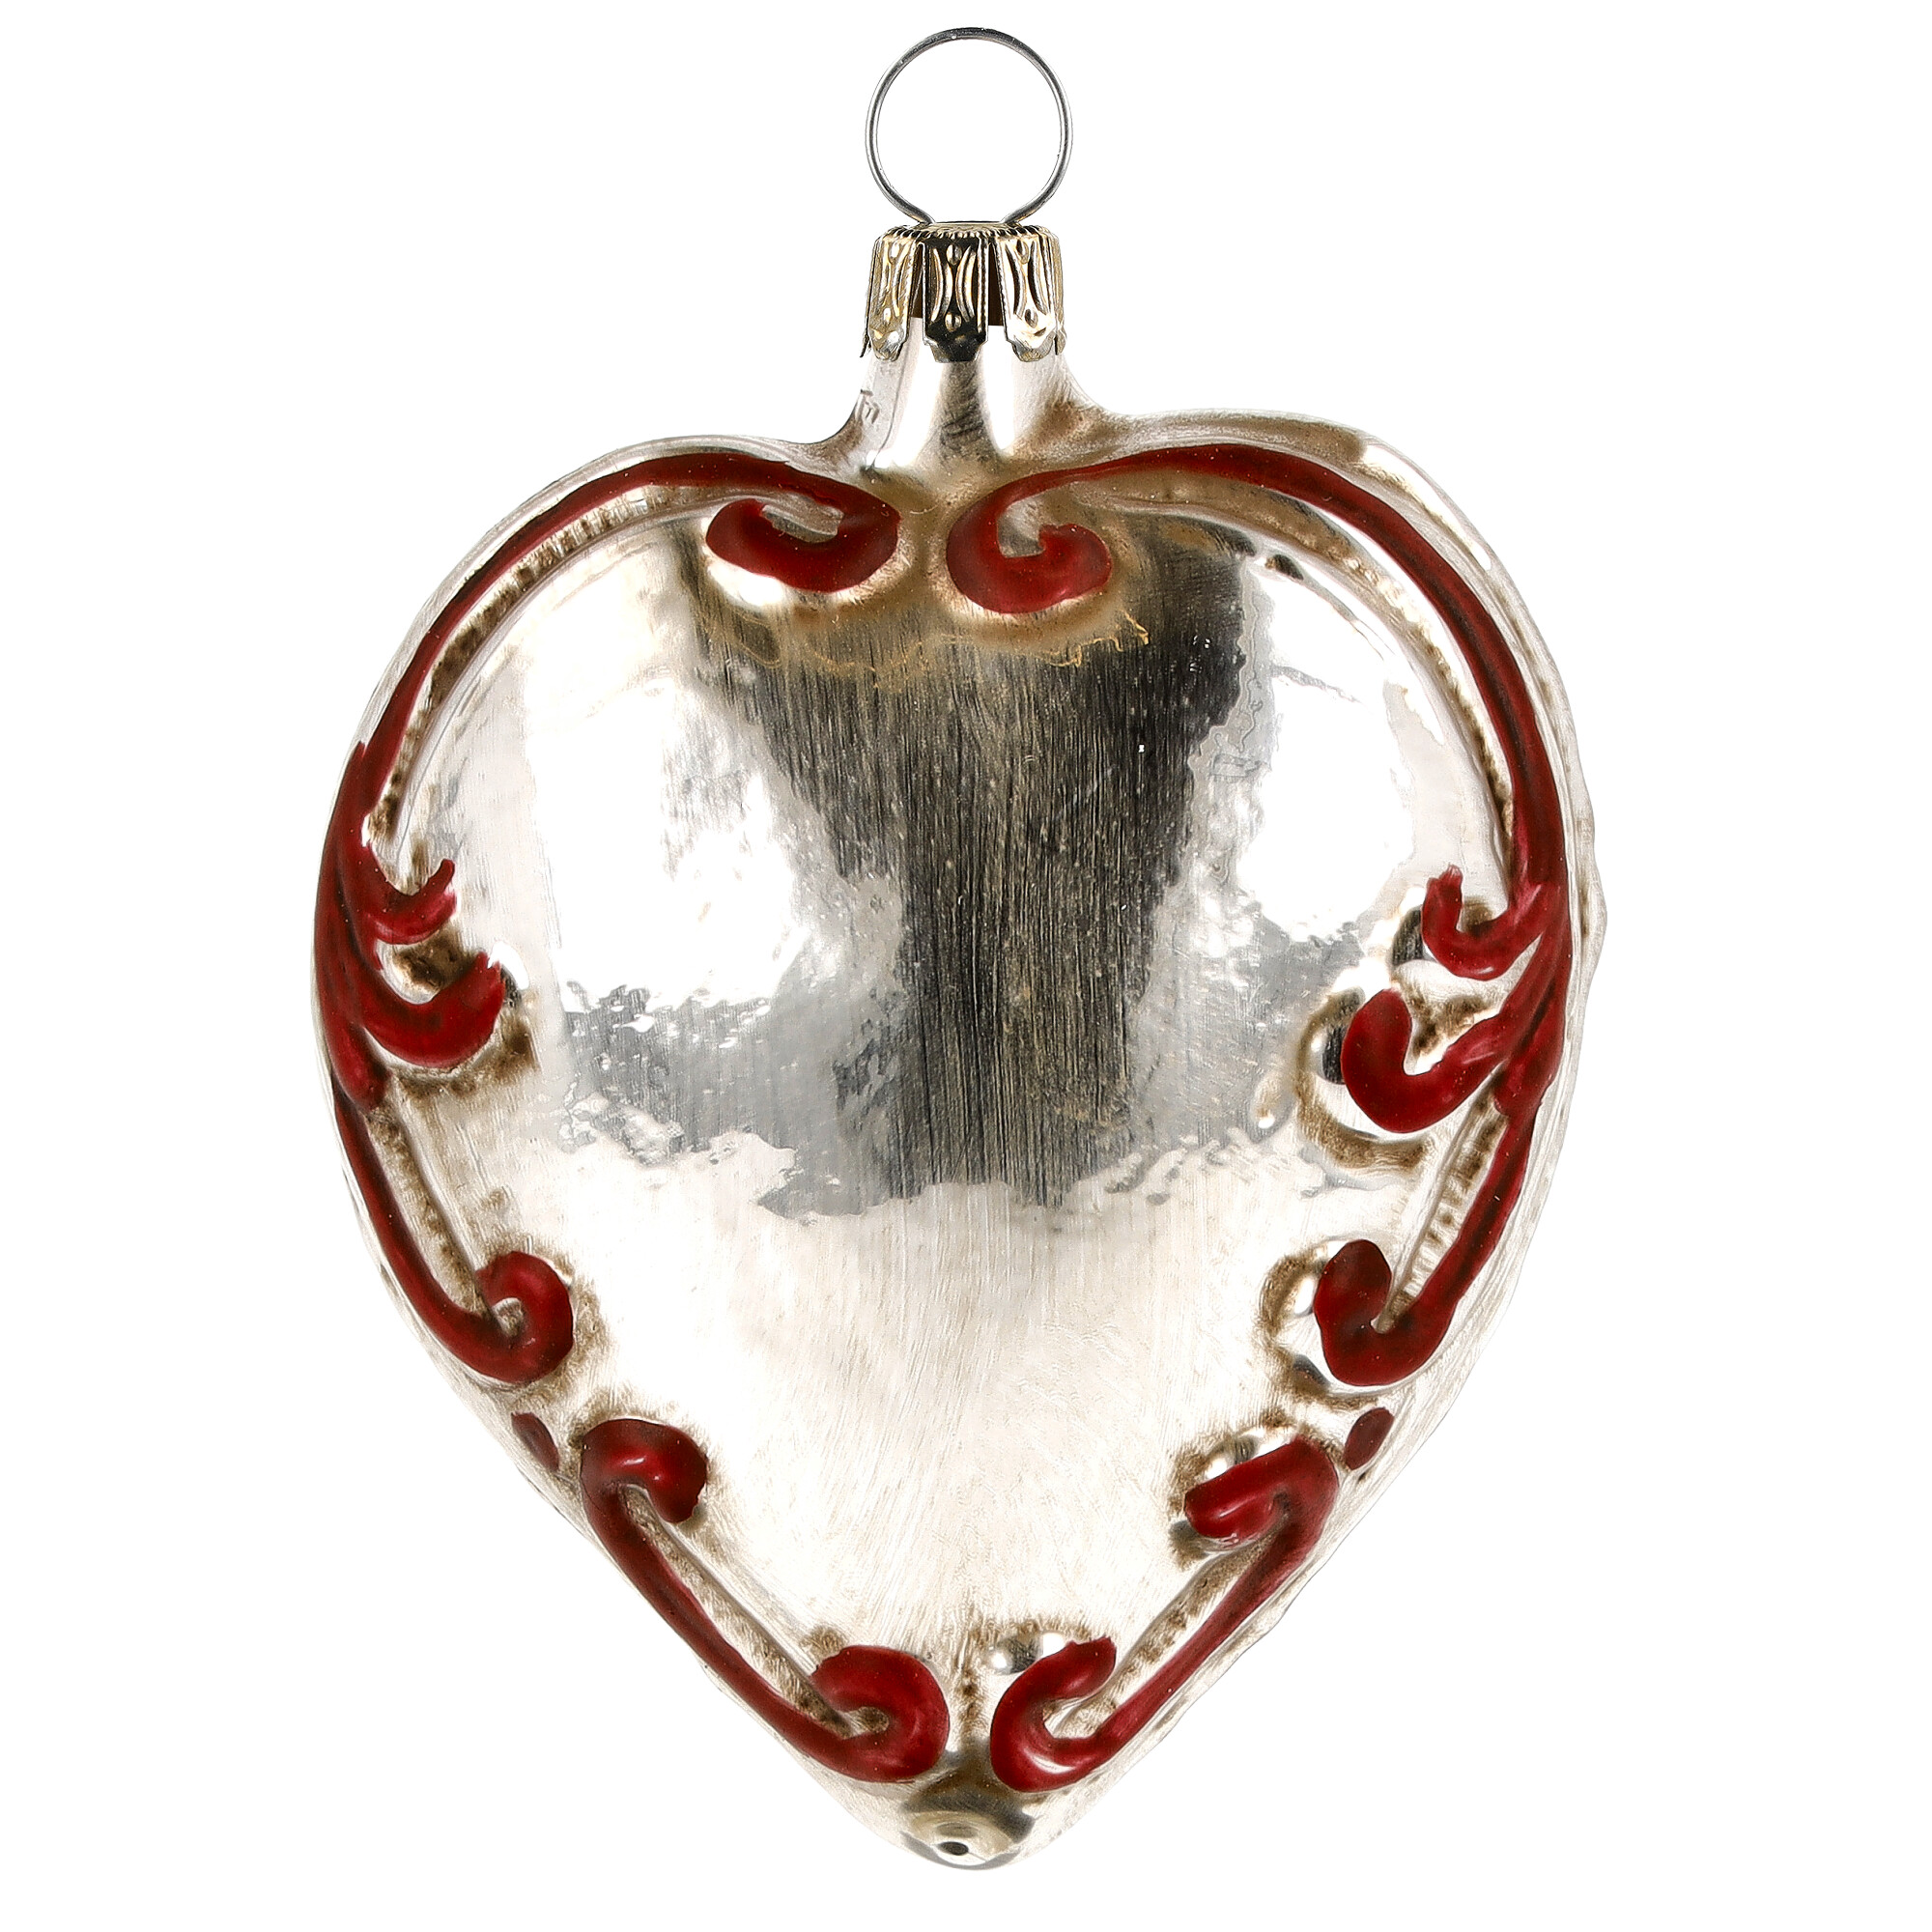 Retro Vintage style Christmas Glass Ornament - Heart with baroque ornaments